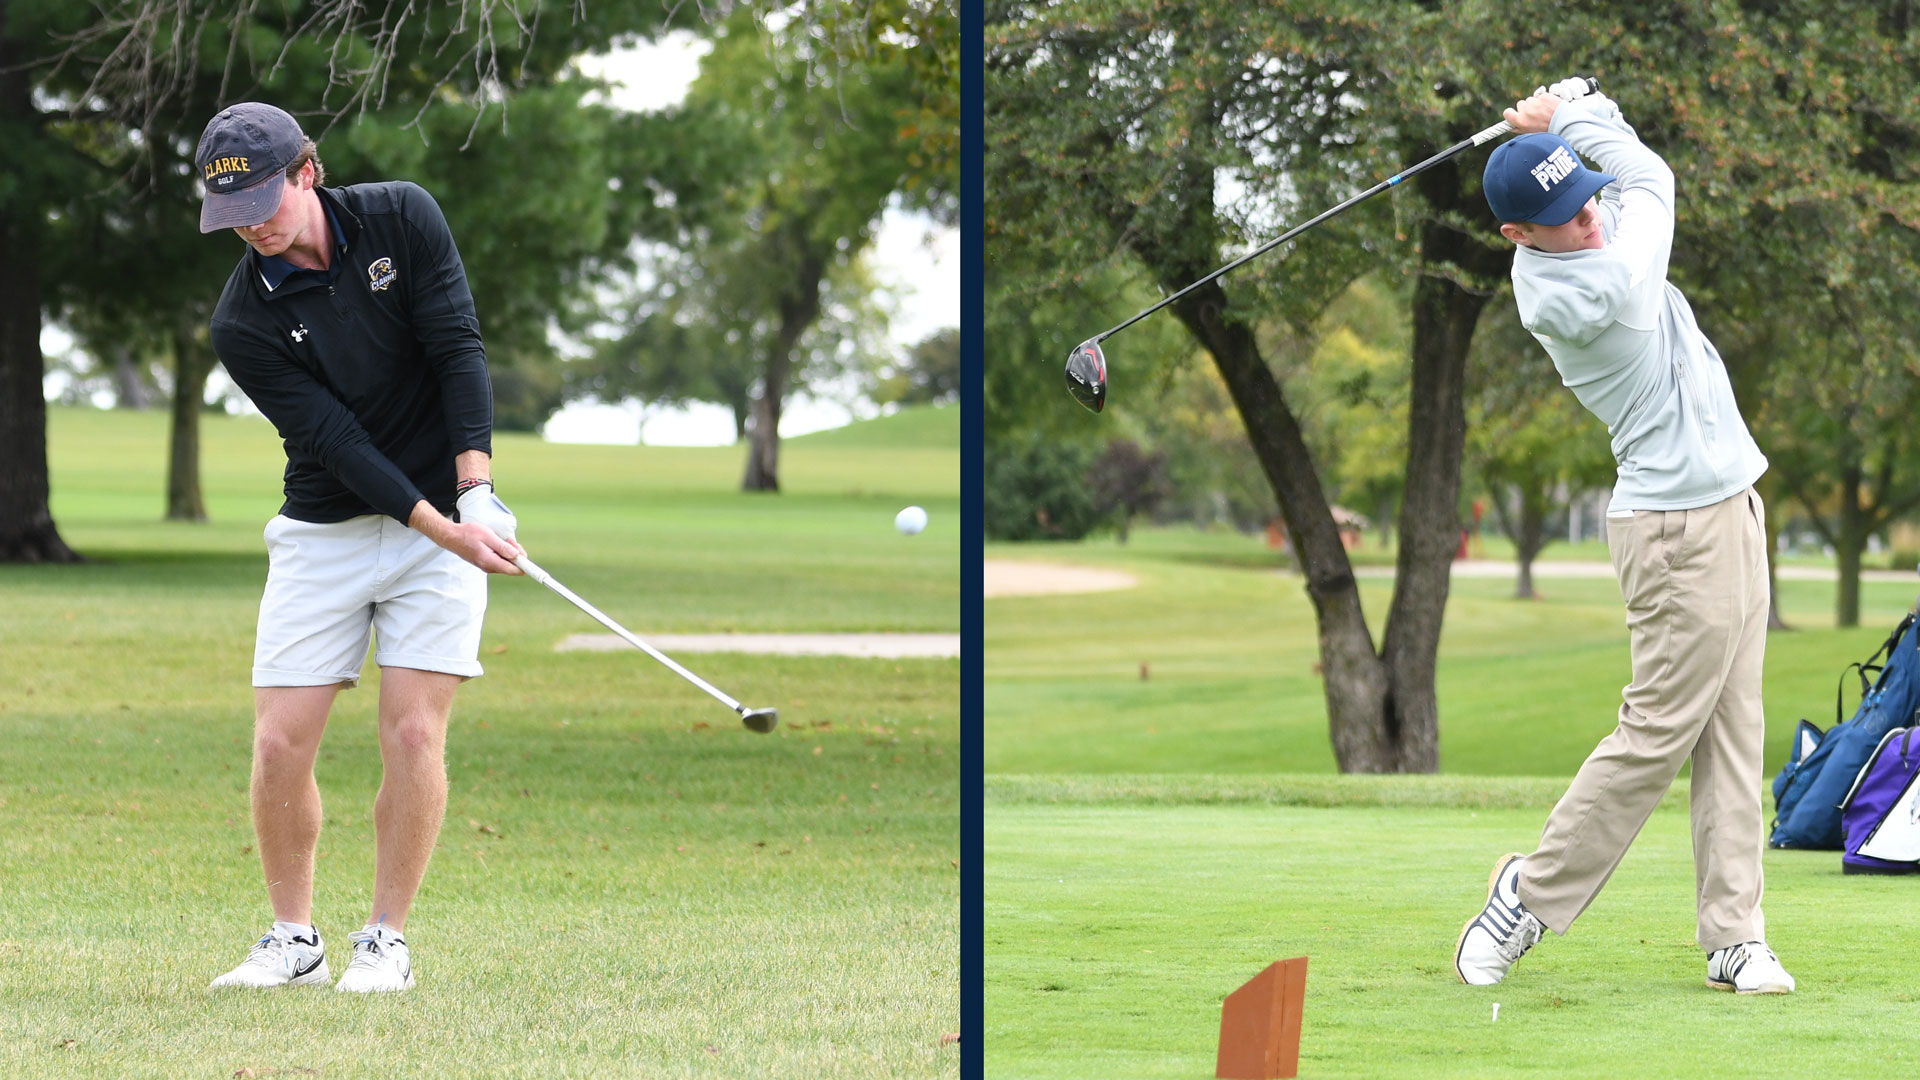 Pride golf teams split head-to-head matchups in match play event at Edelweiss Chalet